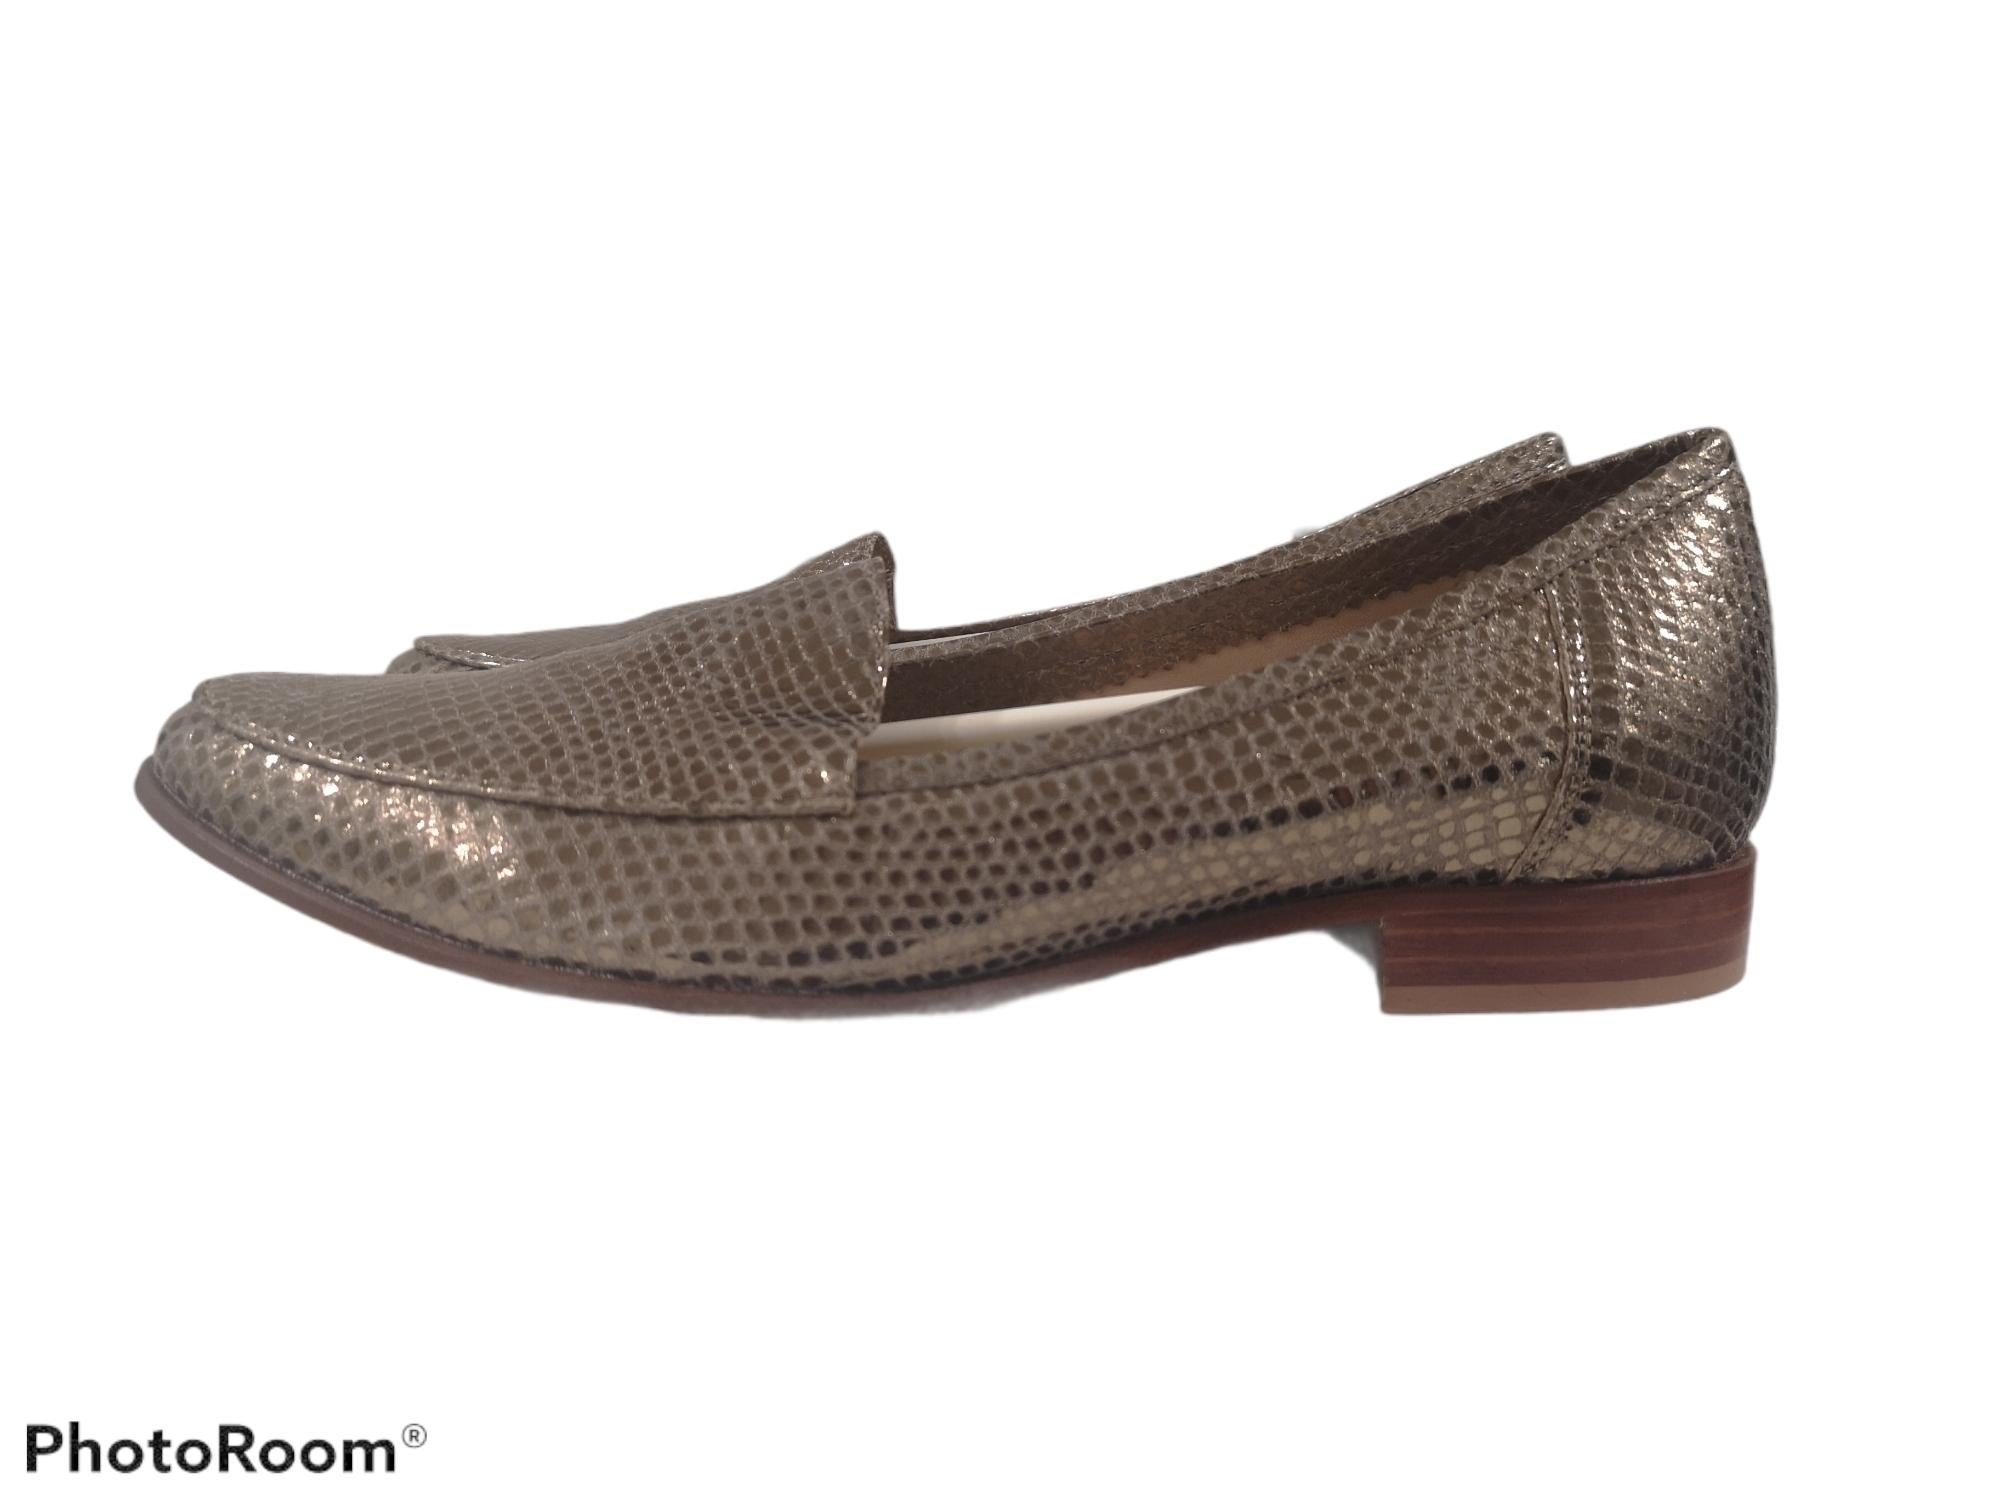 Gold python print leather loafer NWOT
totally made in italy
size available: 36 up to 41 it